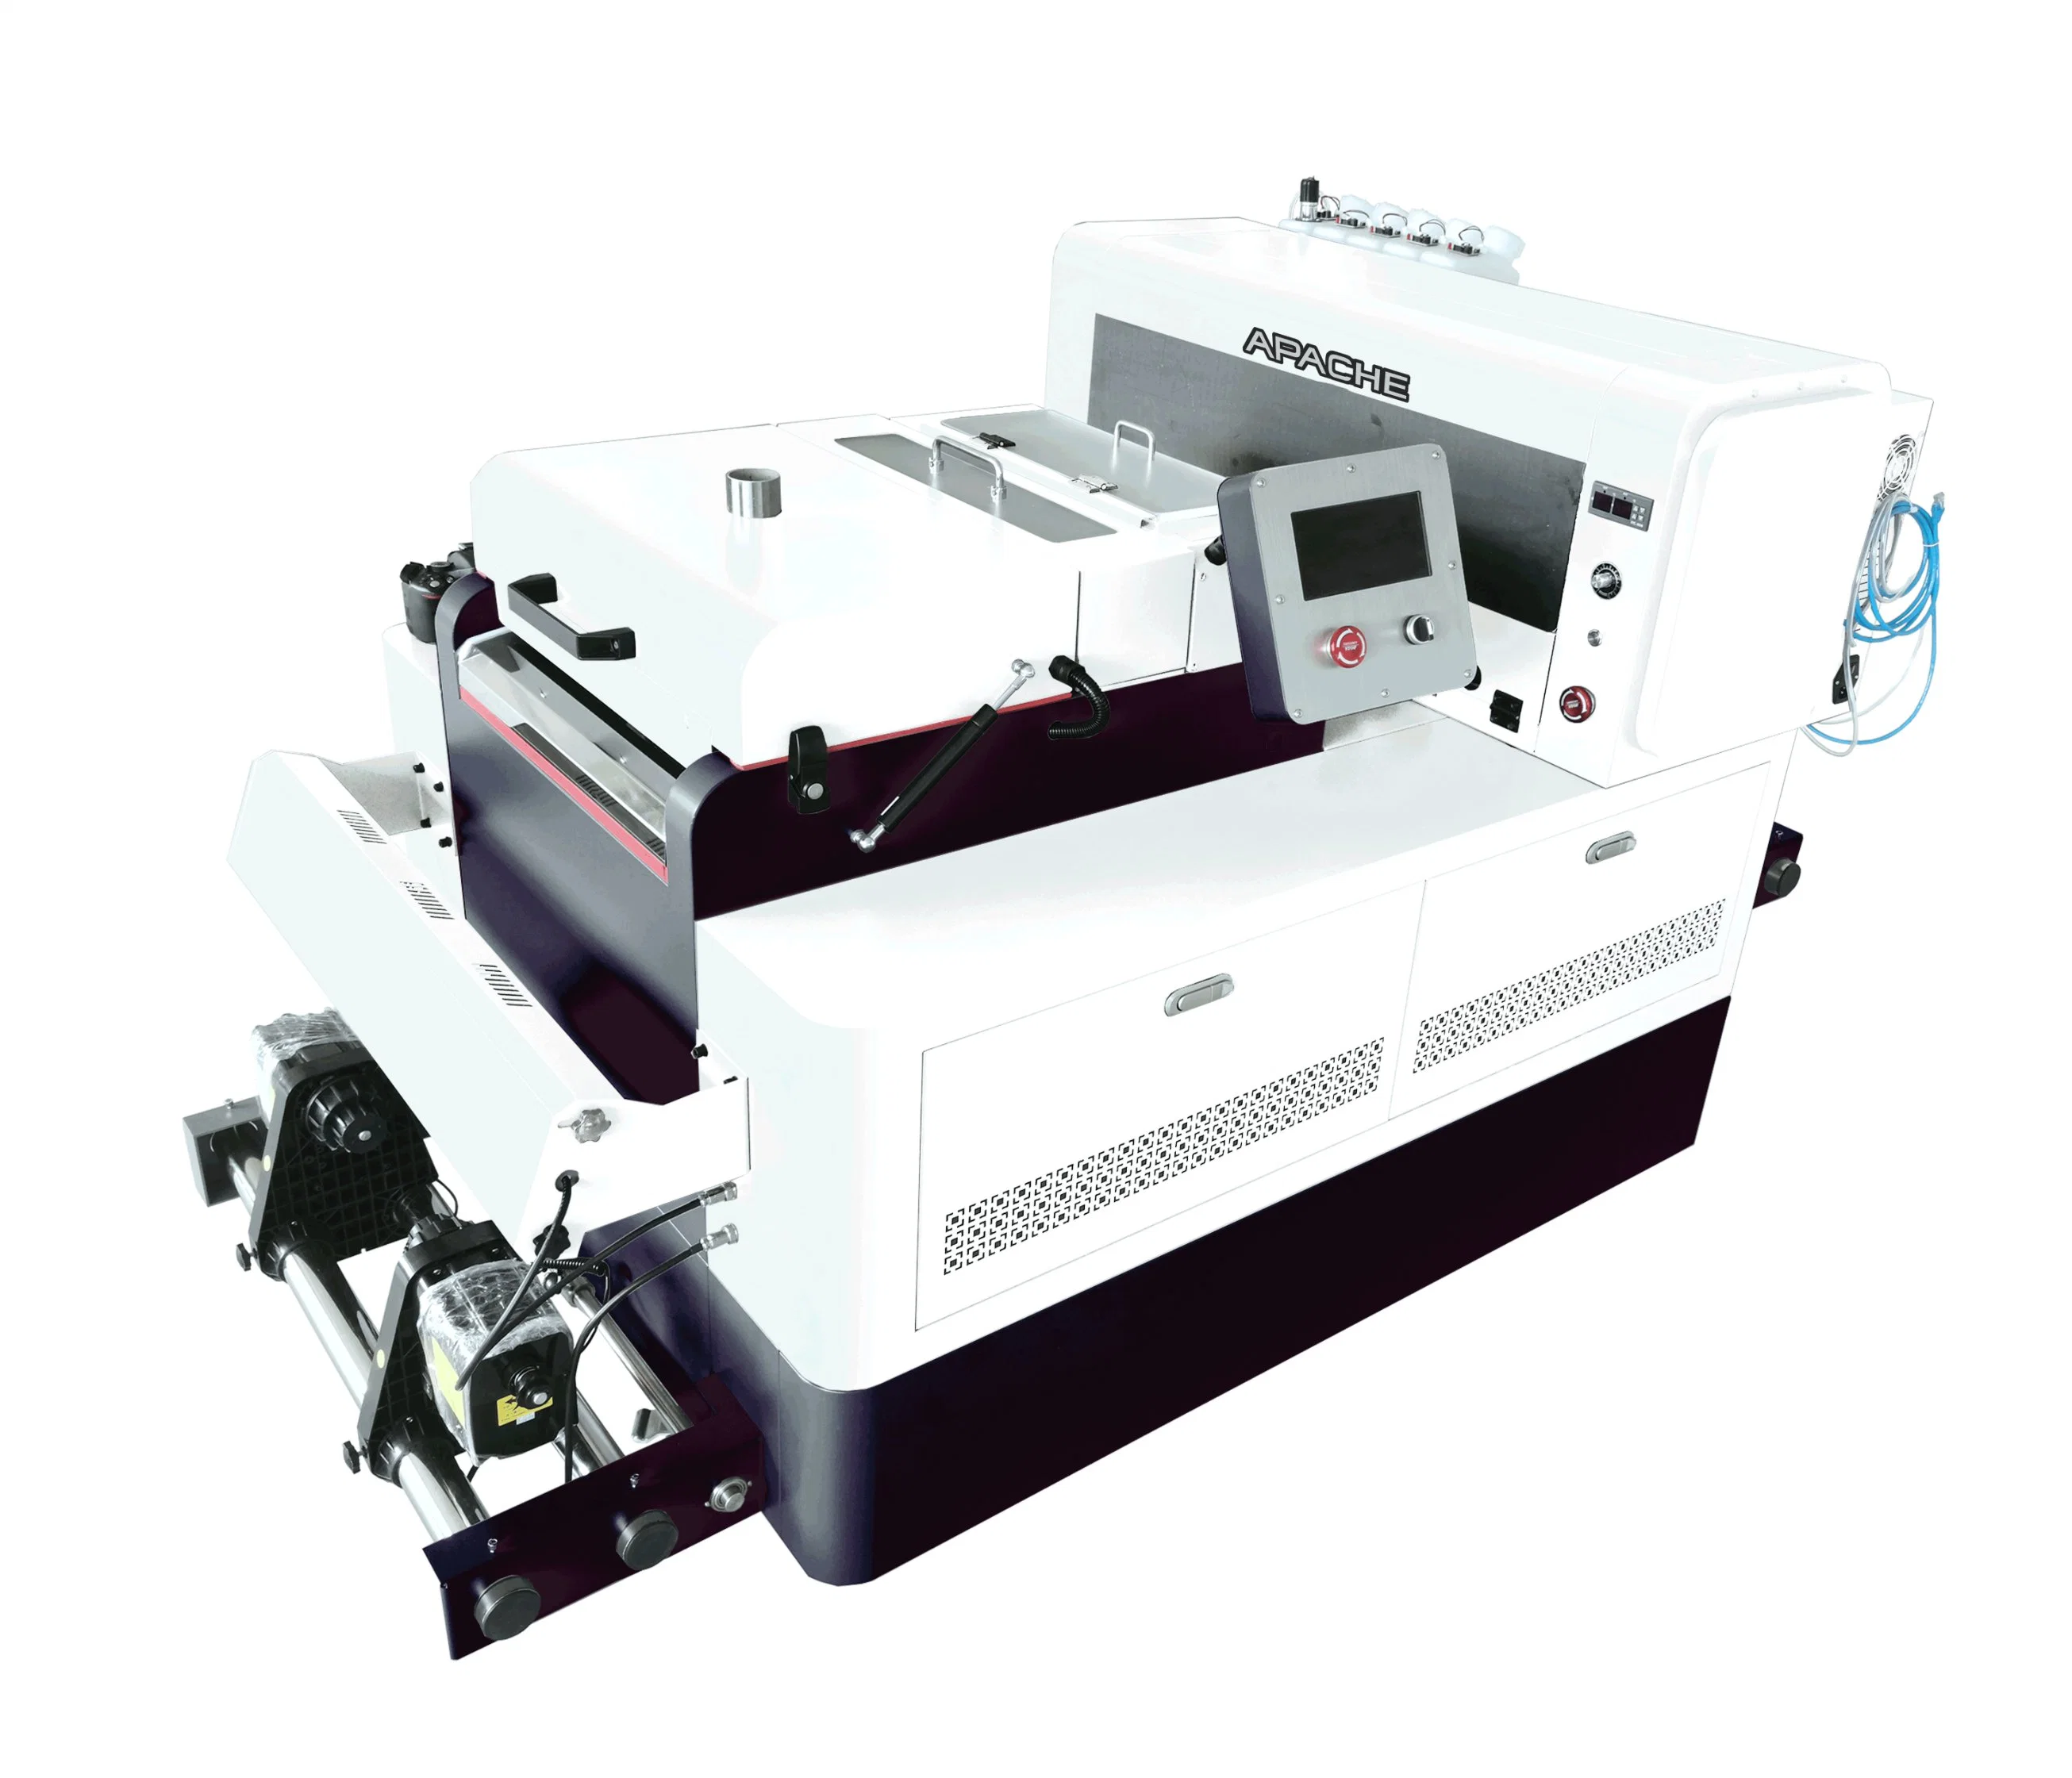 Tshirt Printing Machine with Shaker and Oven Pet Film 30cm Dtf Printer